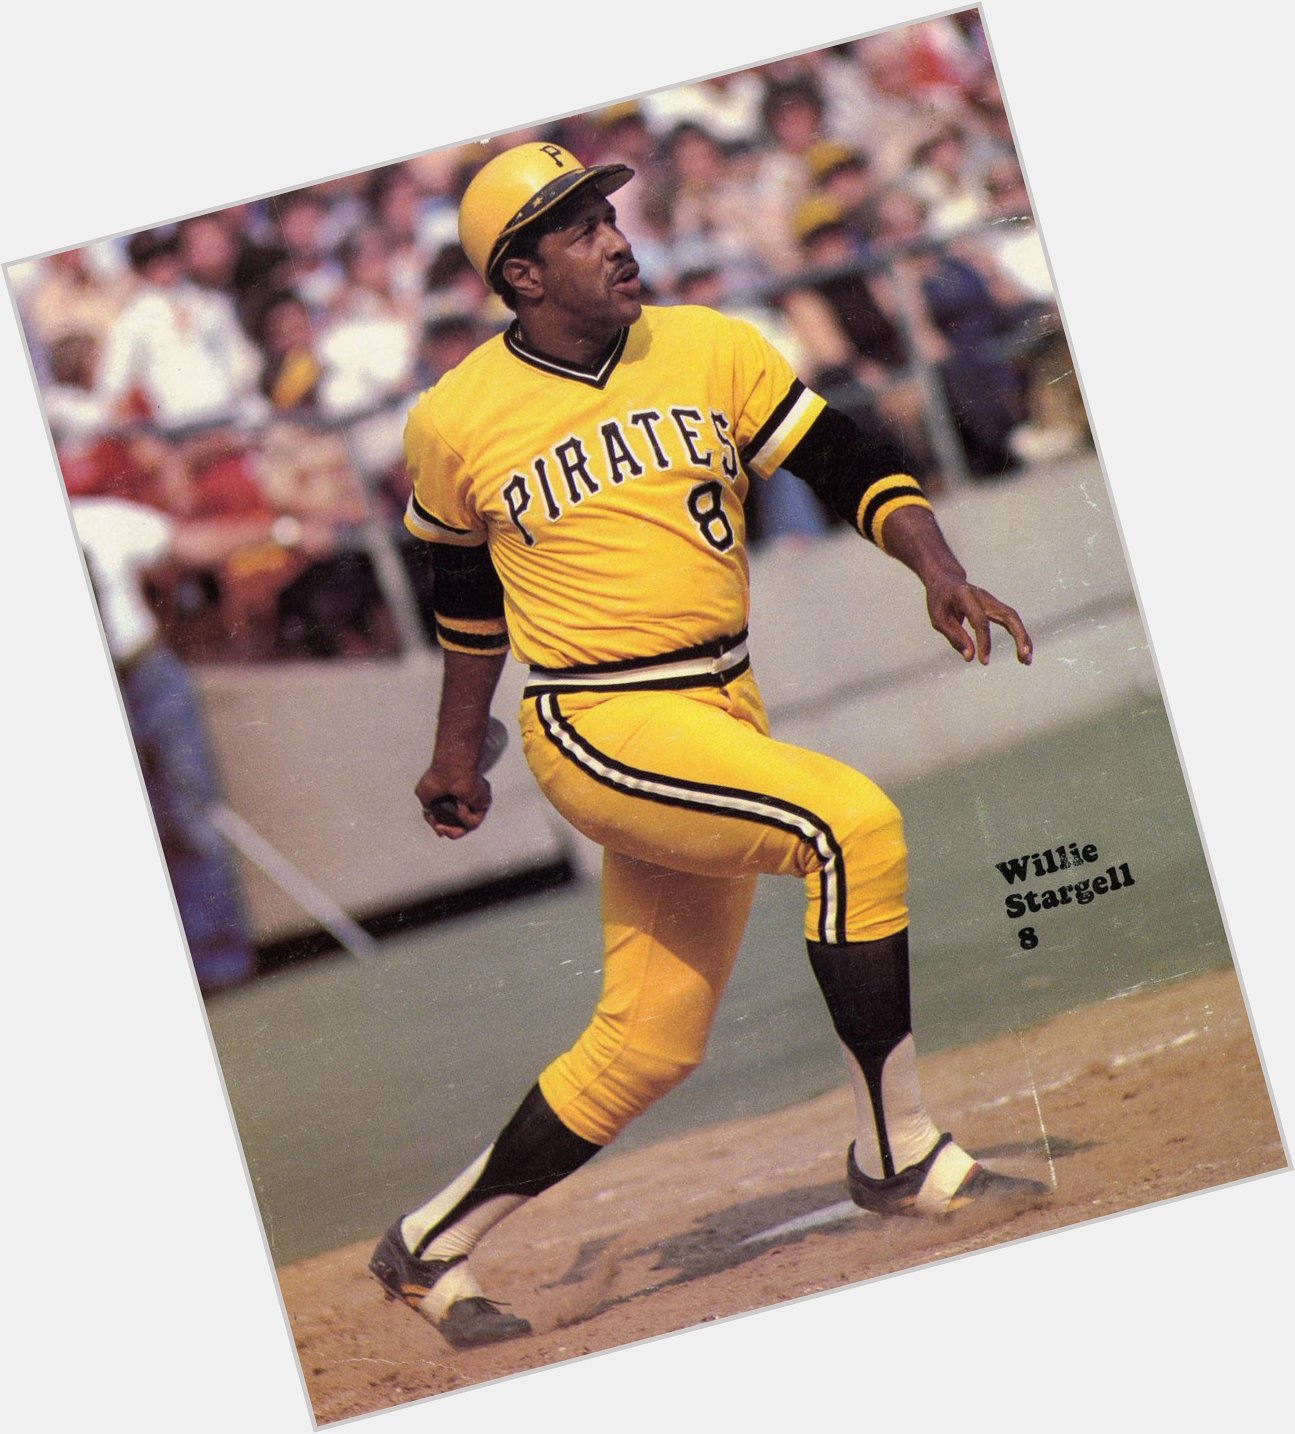 Happy Birthday to Willie Stargell, who would have turned 77 today! 